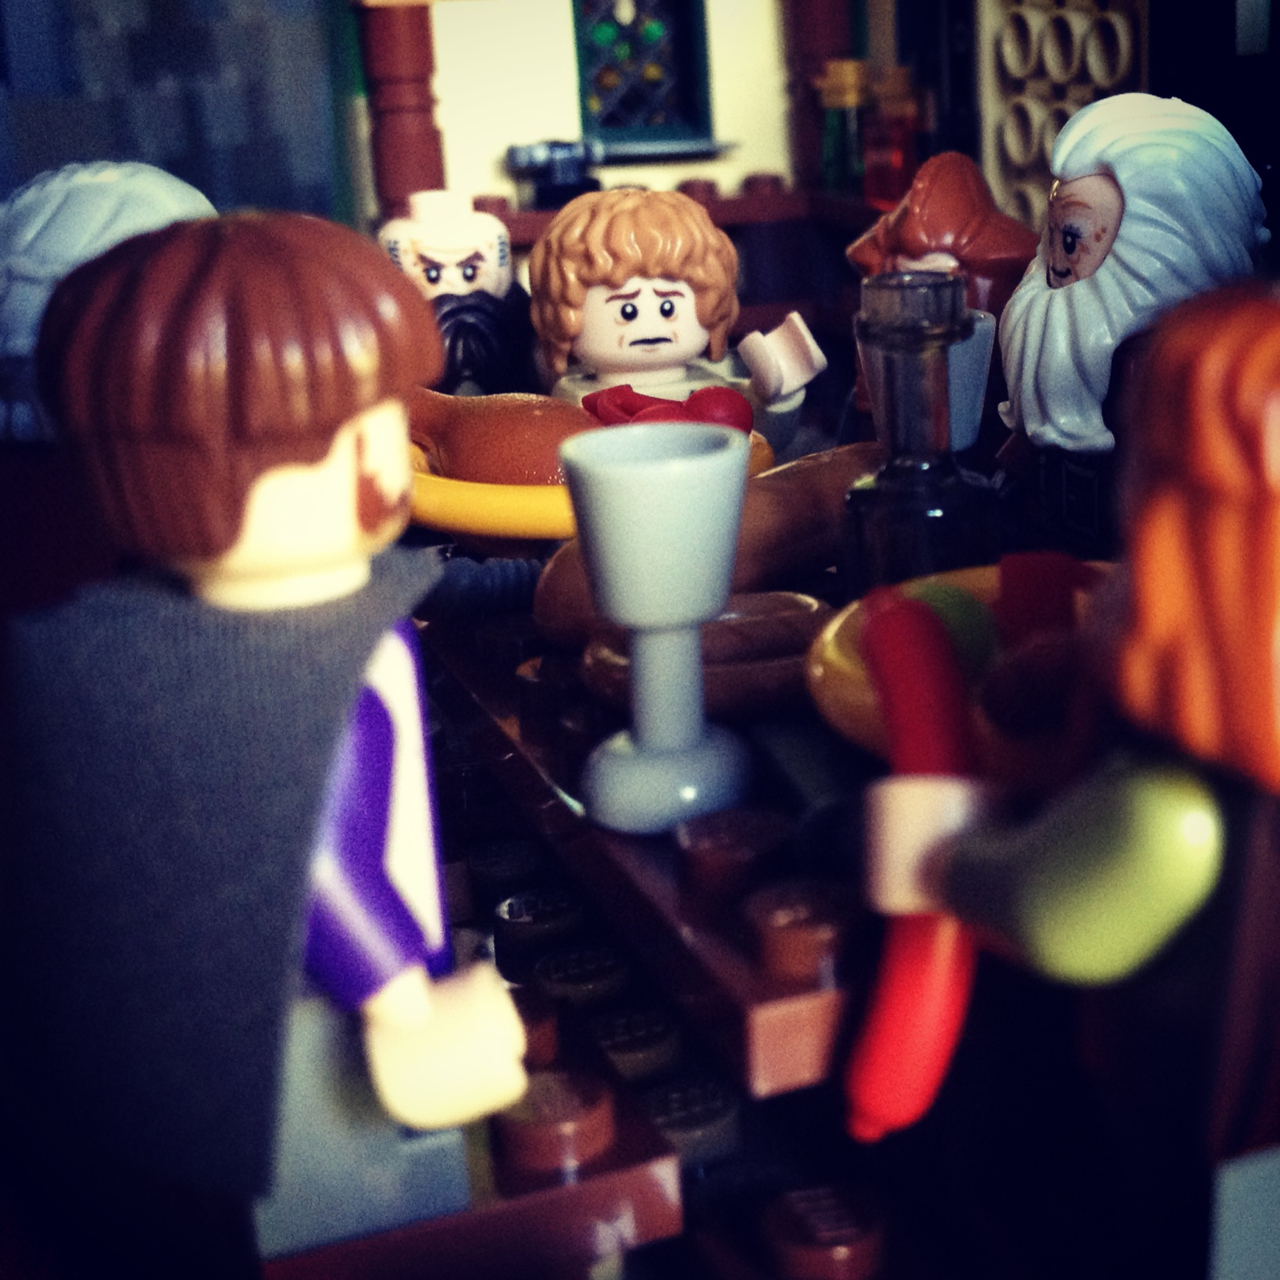 LegoGenre 00215: “He got up trembling. He had less than half a mind to fetch the lamp, and more than half a mind to pretend to, and go and hide behind the beer-barrels in the cellar, and not come out again until all the dwarves had gone away.”